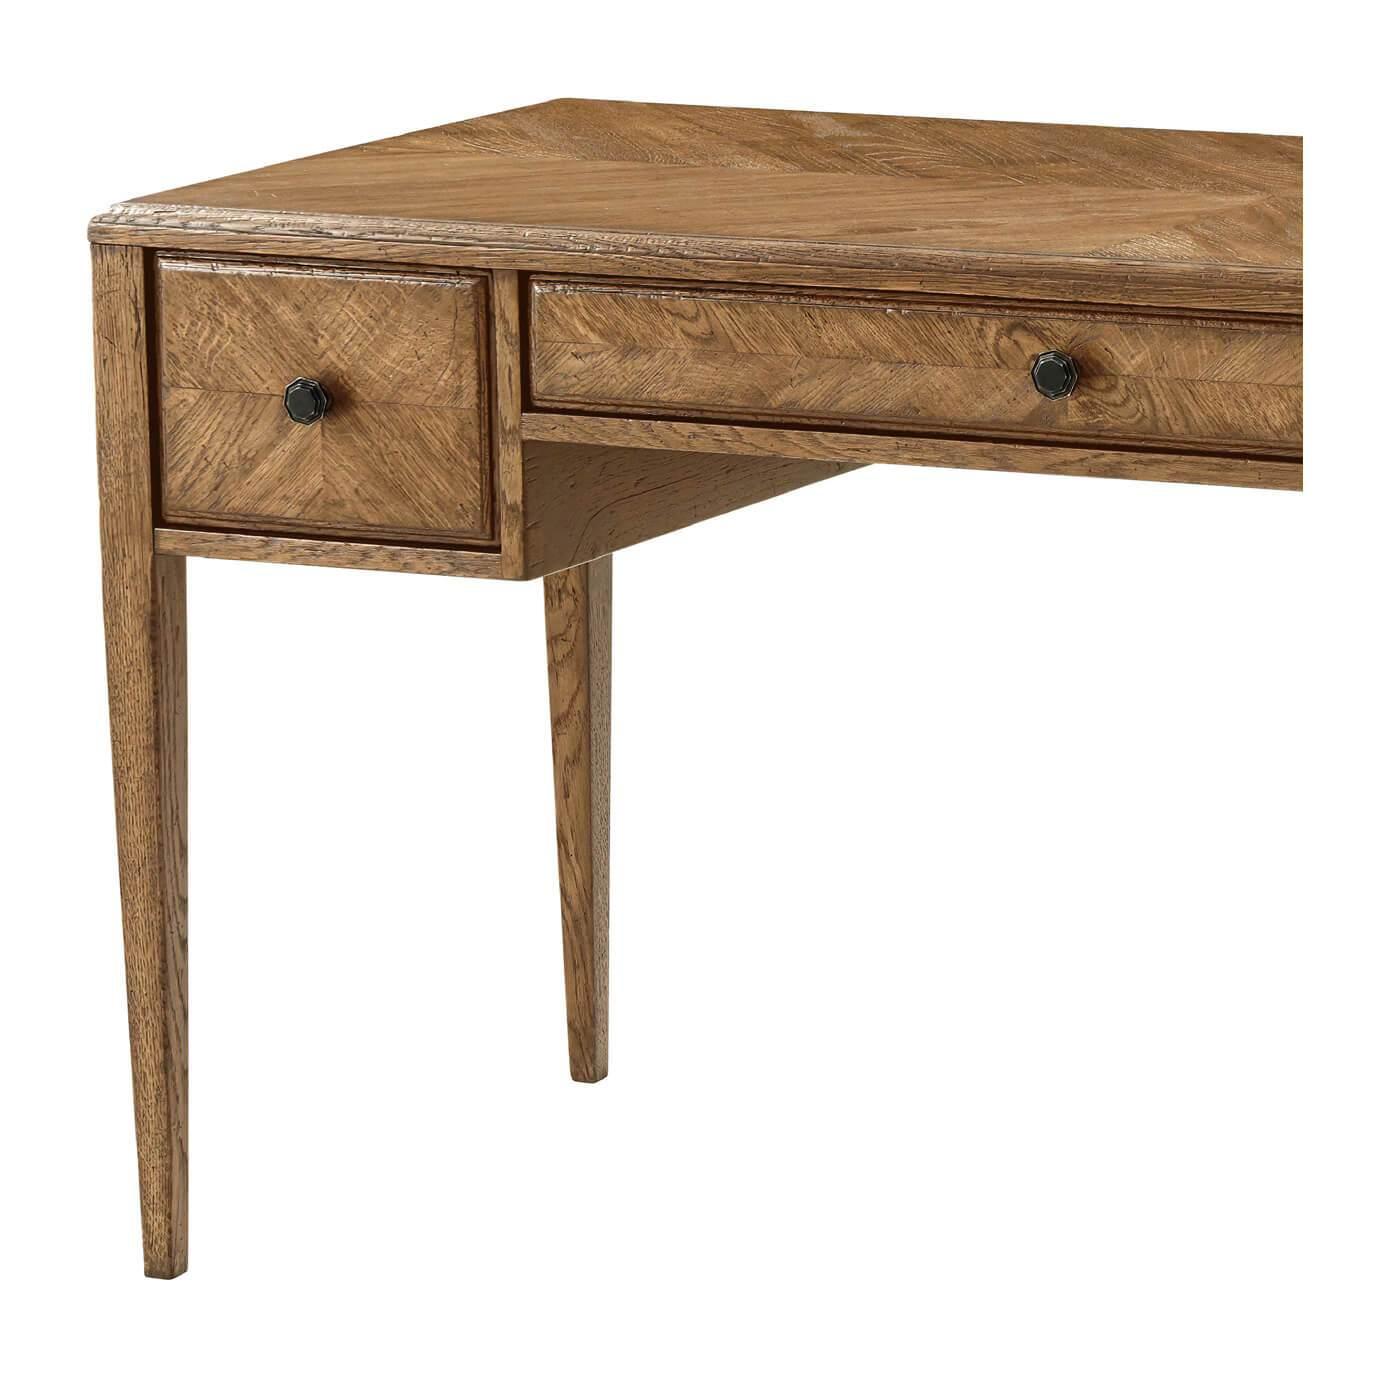 An Italian NeoClassic style starburst pattern parquetry desk with tapered legs. It has one center drawer flanked by two smaller drawers with Verde Bronze finished handles. 
Shown in dawn finish
Dimensions
59.5